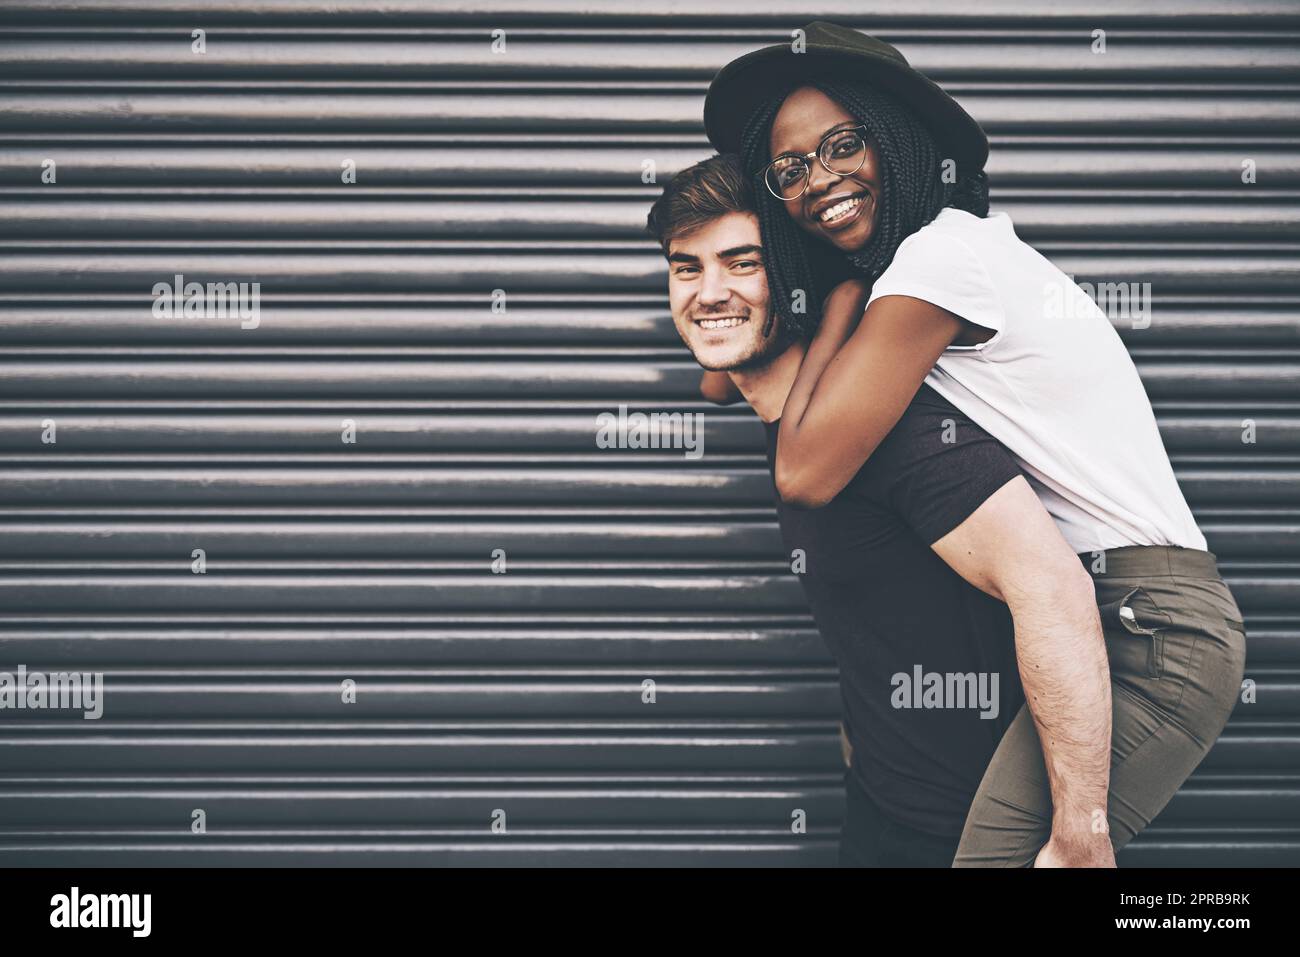 Cute, loving and affectionate interracial couple having fun, being playful and enjoying time together on copy space background. Happy boyfriend giving young girlfriend a piggyback ride outside Stock Photo